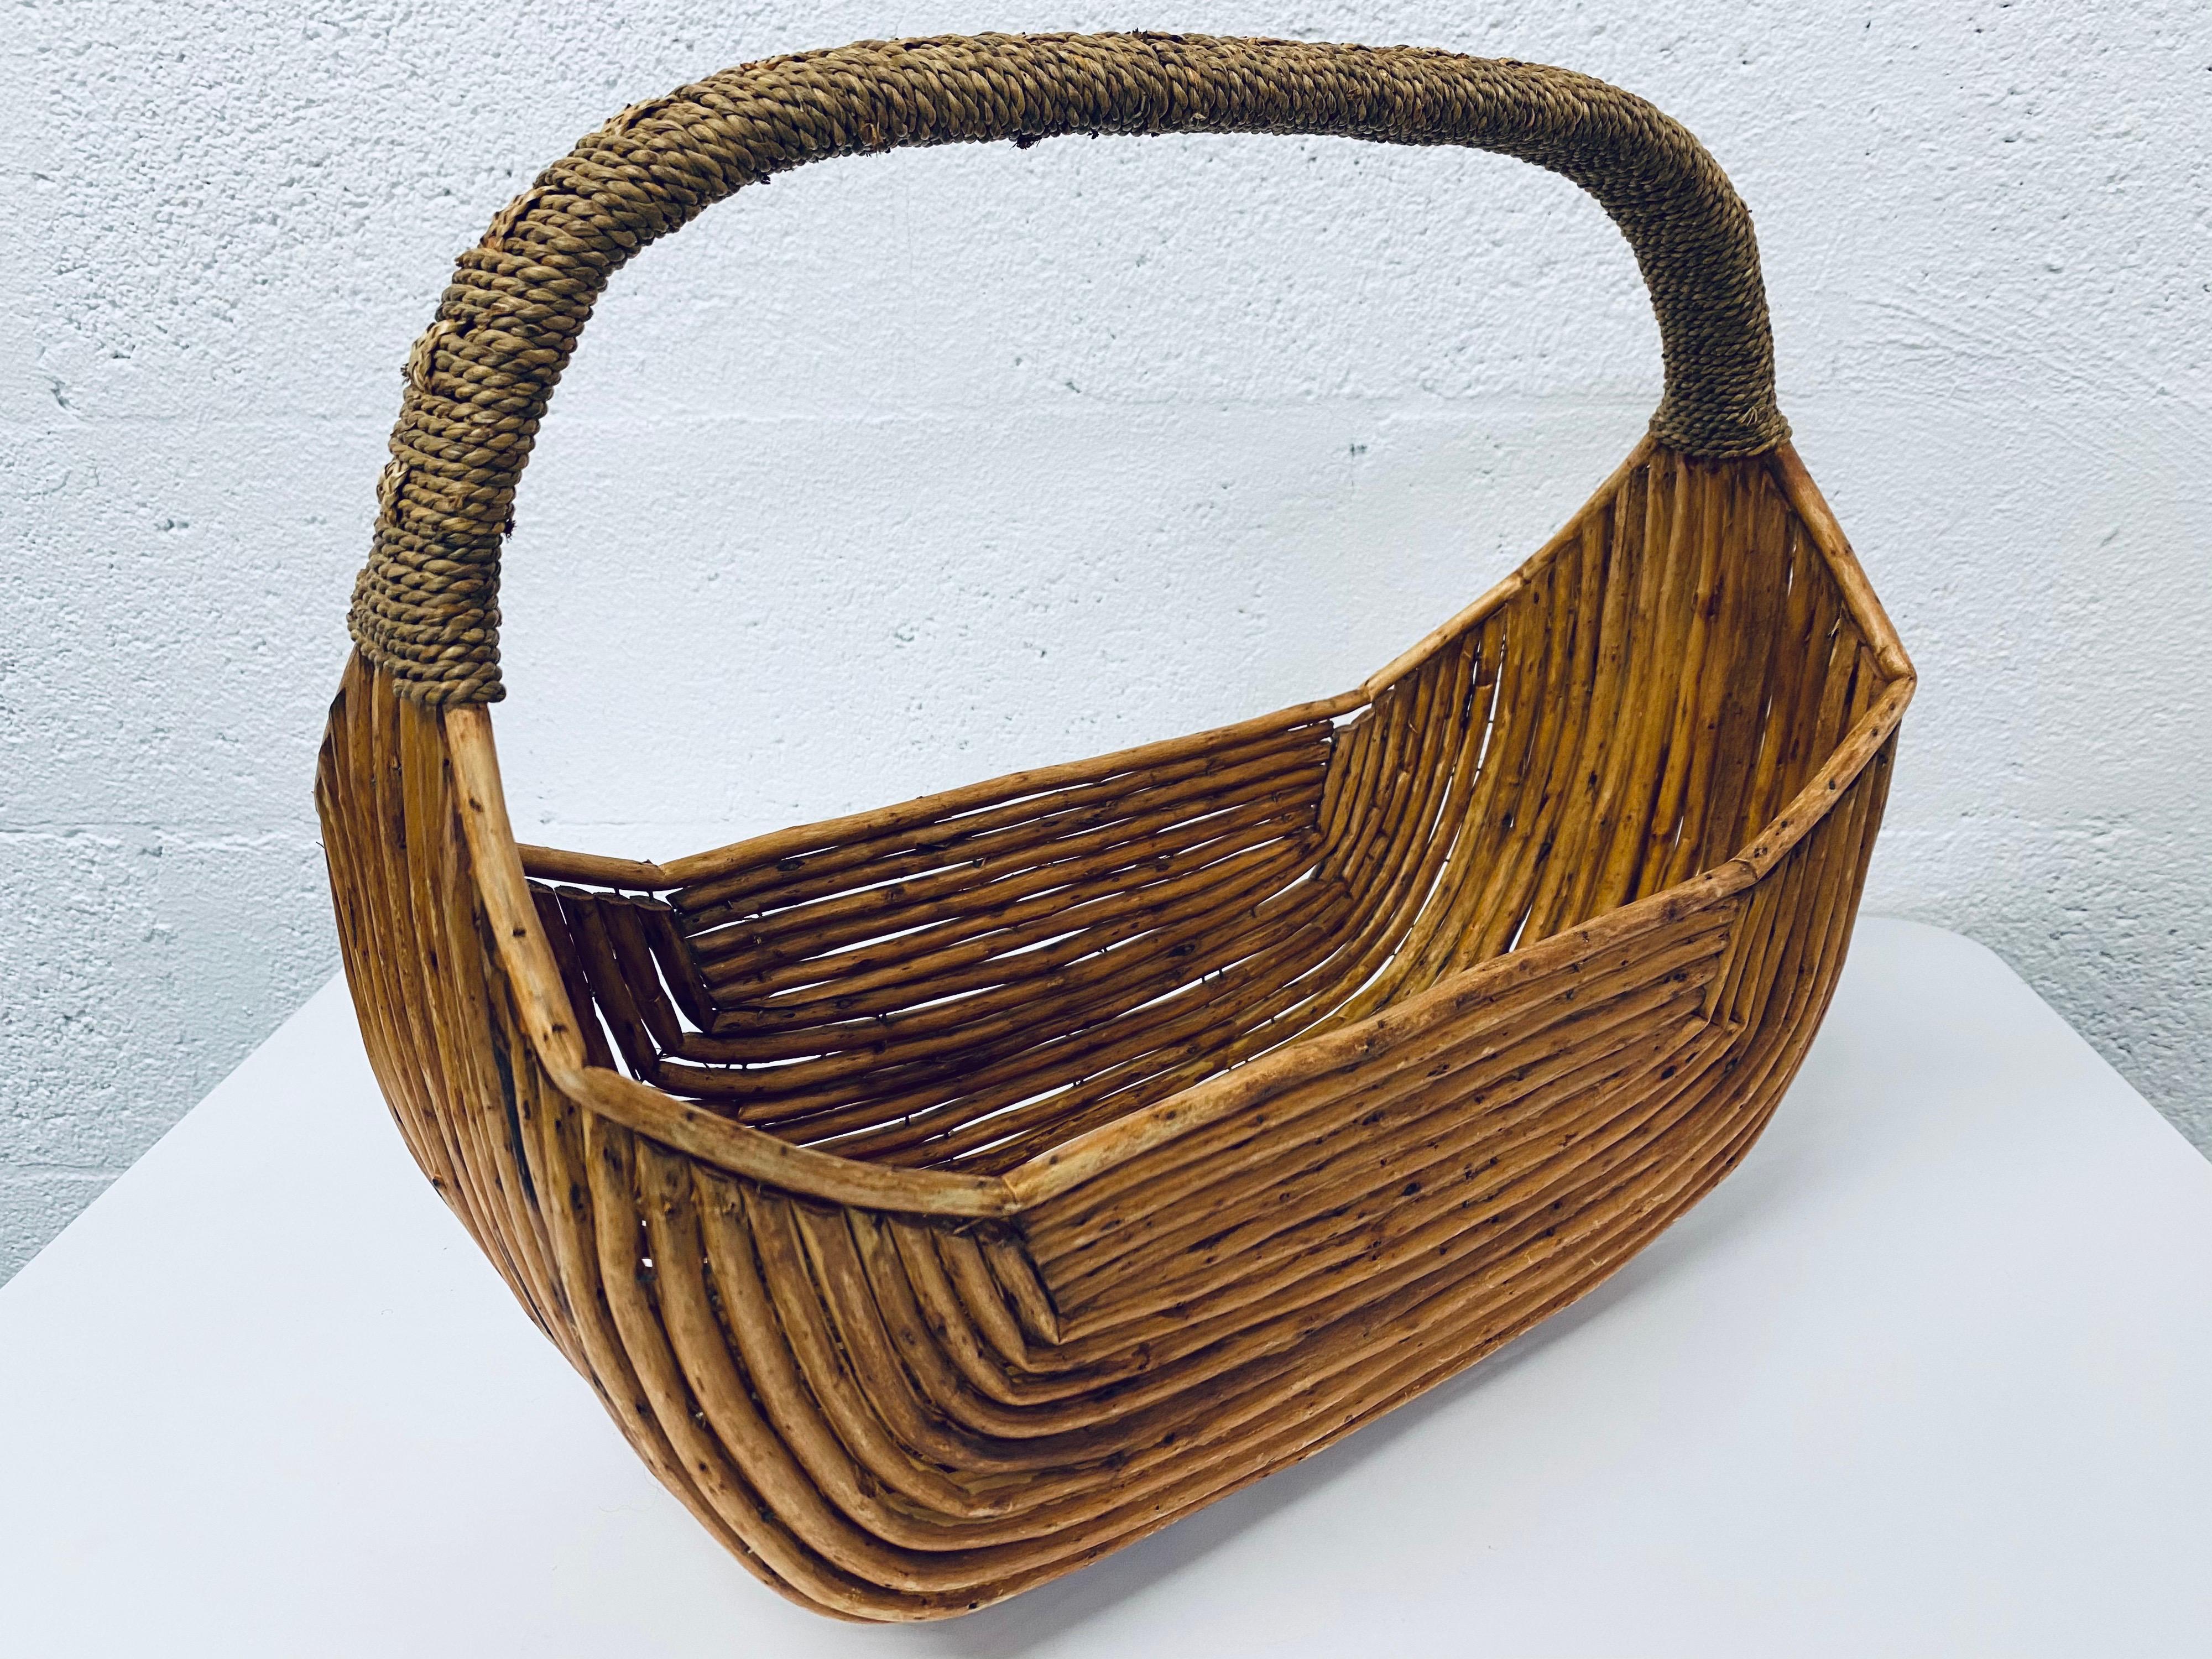 Midcentury pencil reed basket with woven rope handle.